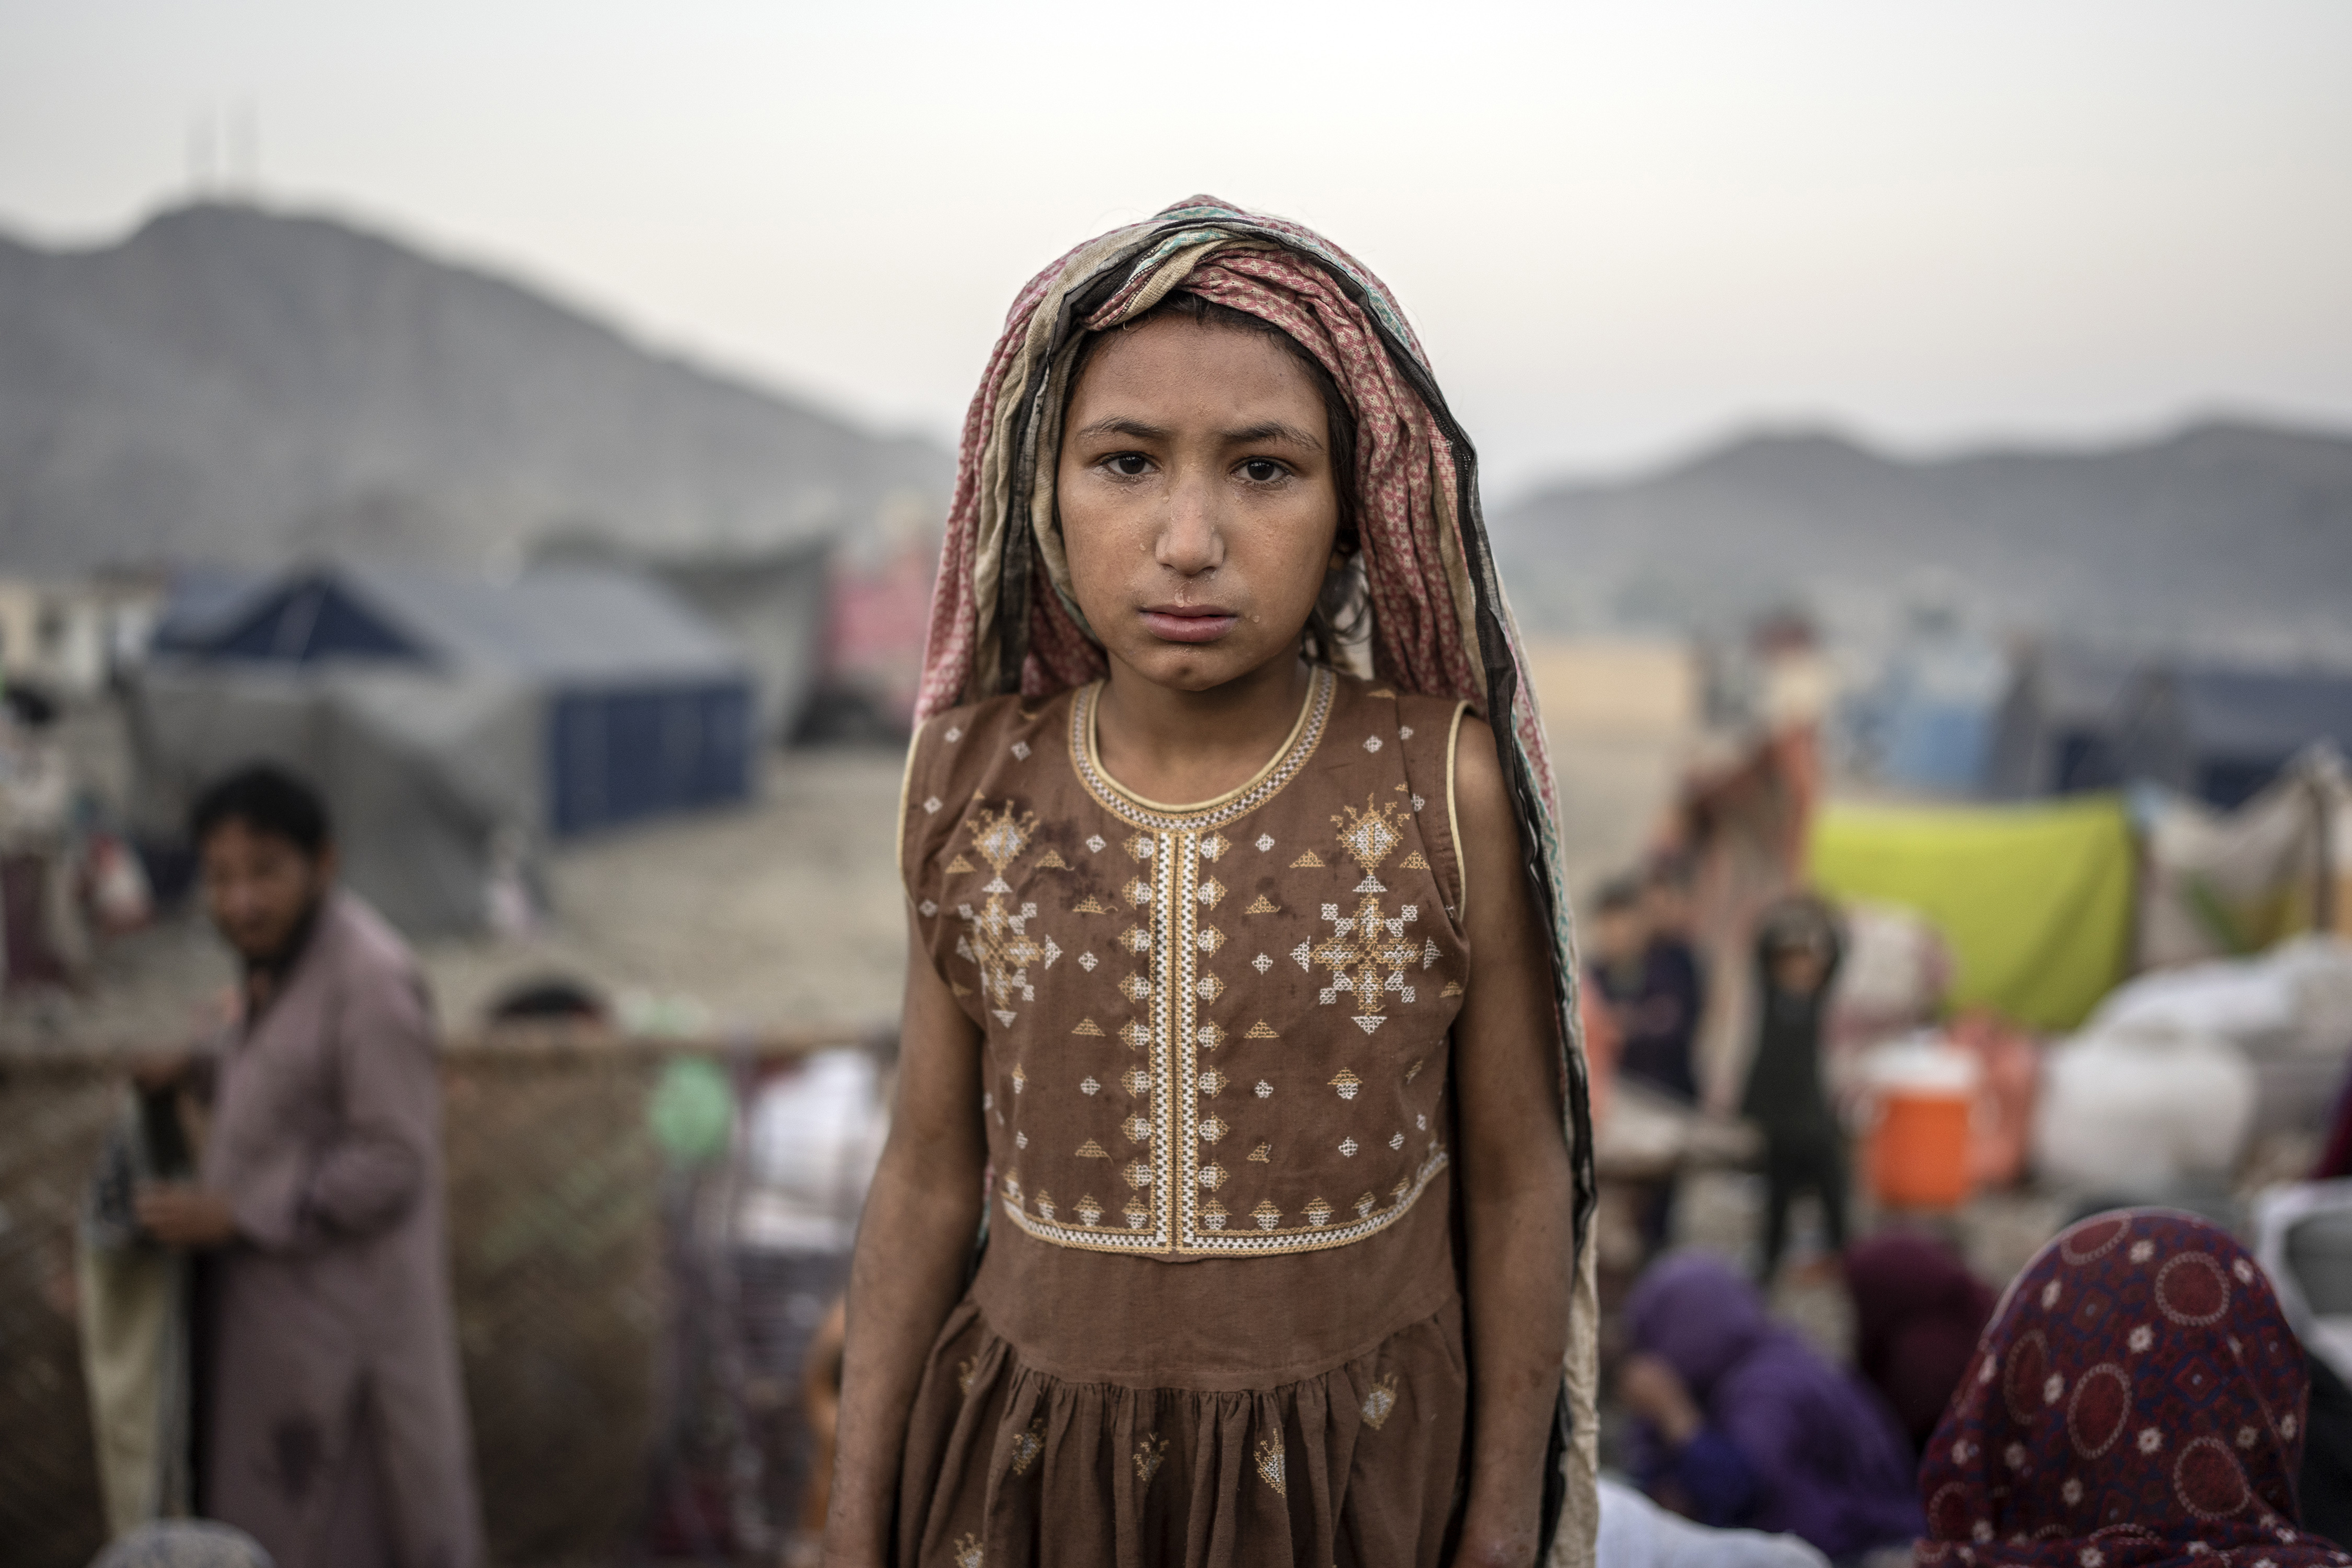 An Afghan refugee girl stands for a photo in a camp near the Torkham Pakistan-Afghanistan border in Torkham, Afghanistan.